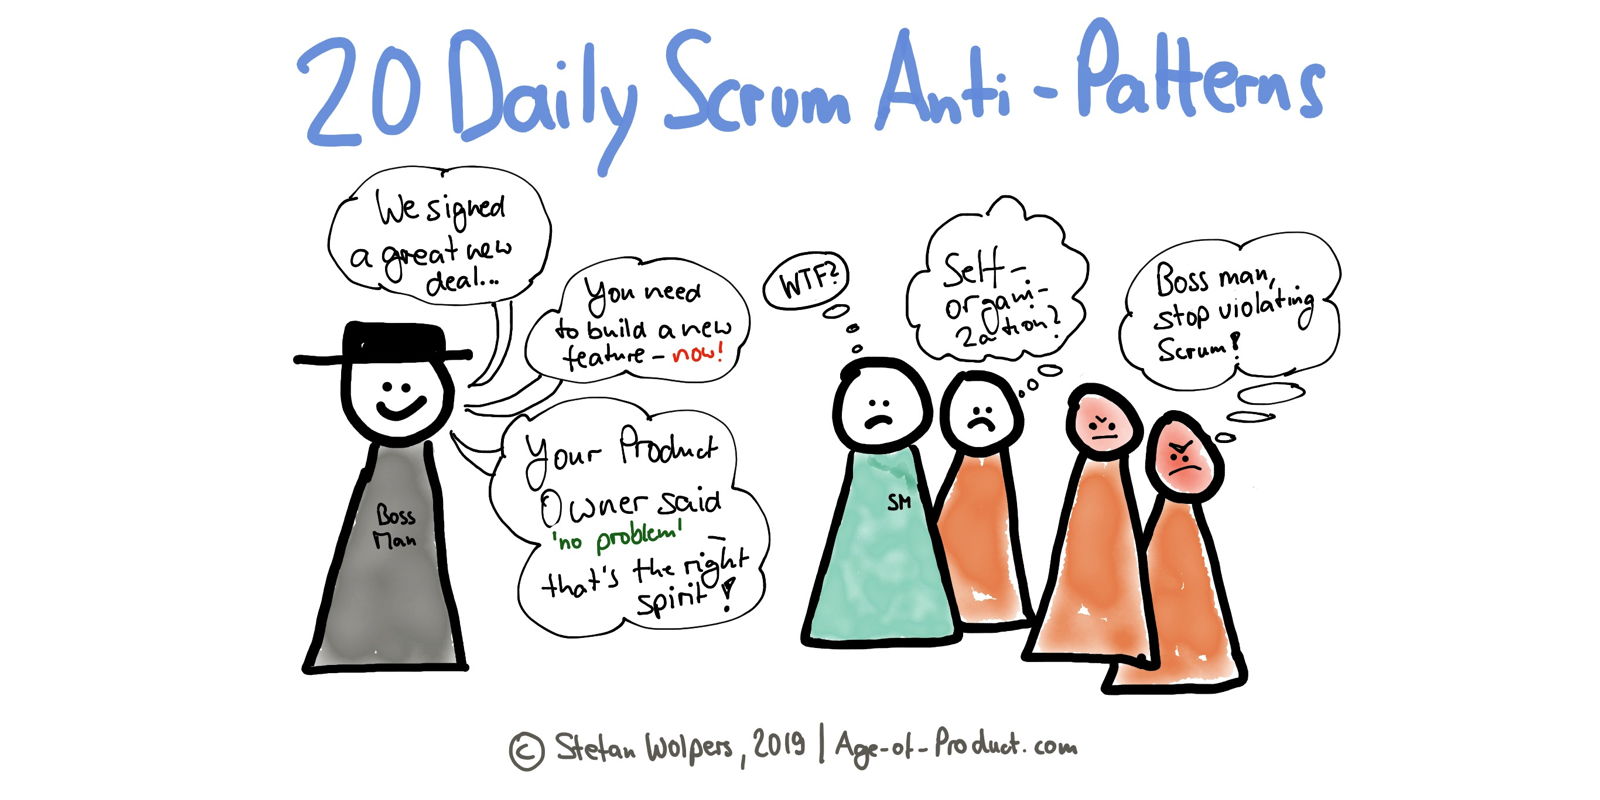 Daily Scrum Antipatterns: new work imposed